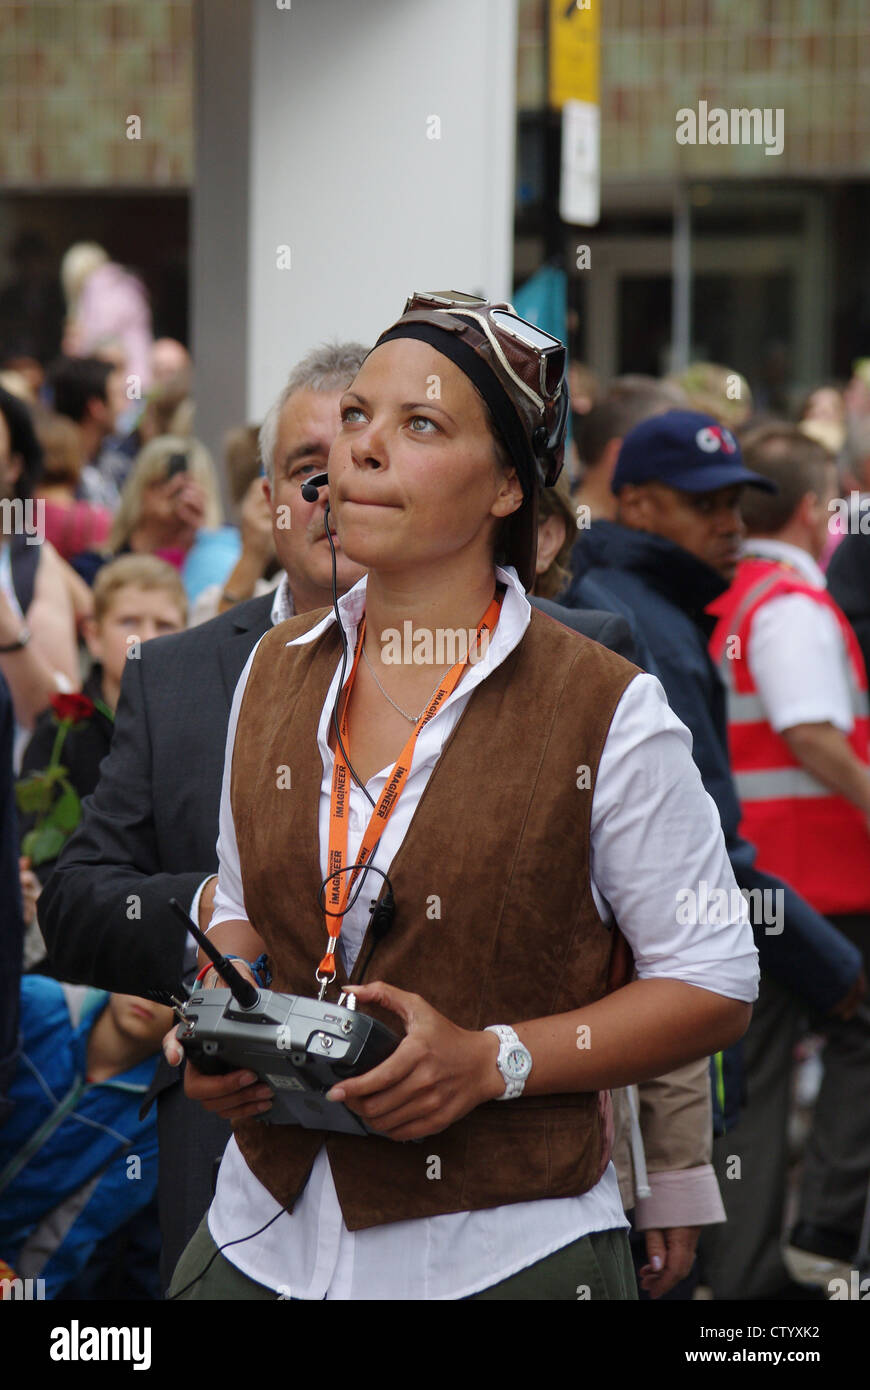 Woman operating a radio control unit for the Godiva puppet, a Cultural Olympiad event in Northampton Stock Photo